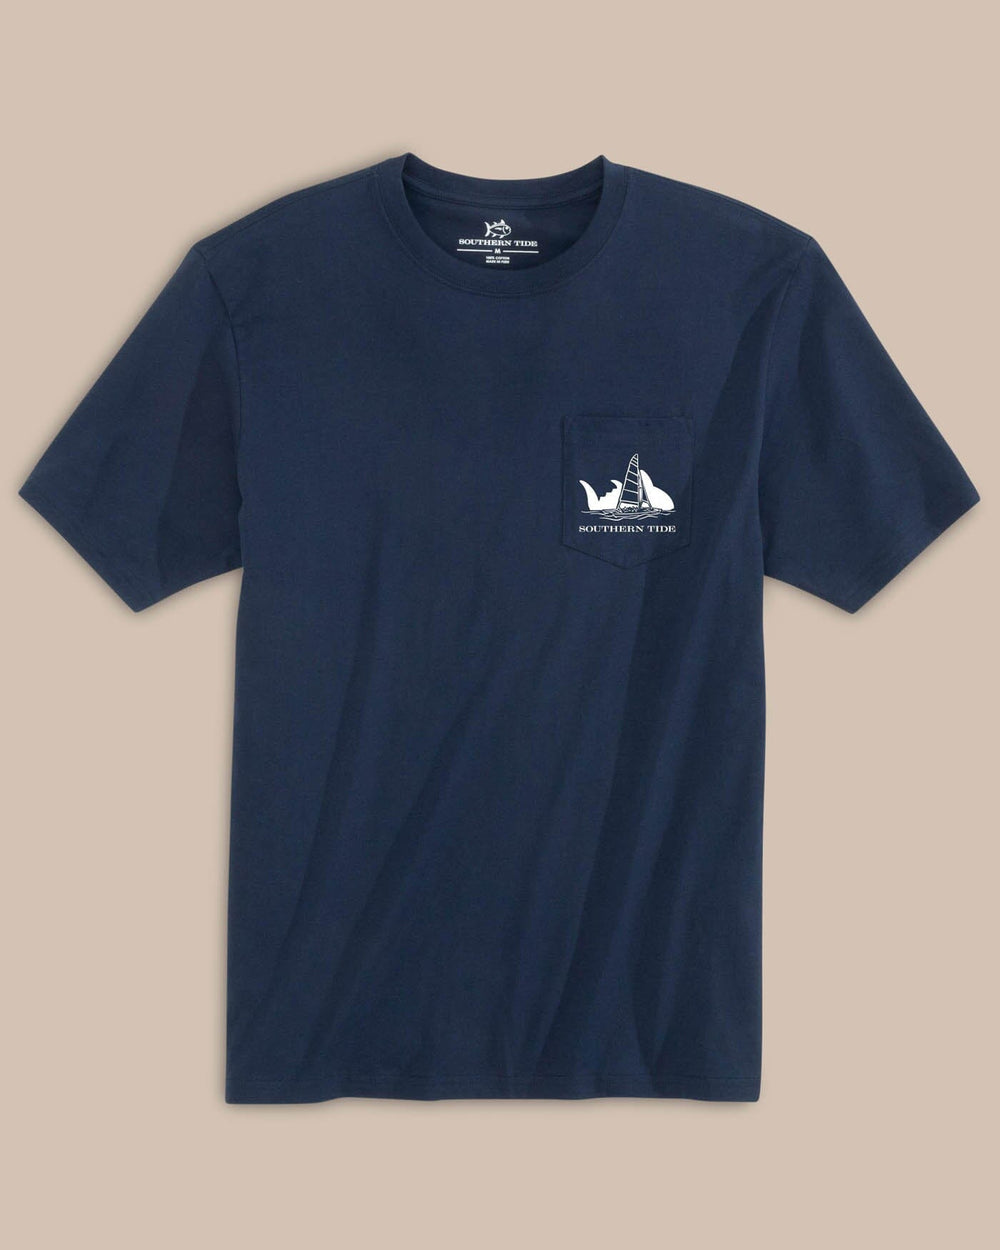 The front view of the Sunset Silhouette T-Shirt by Southern Tide - Navy